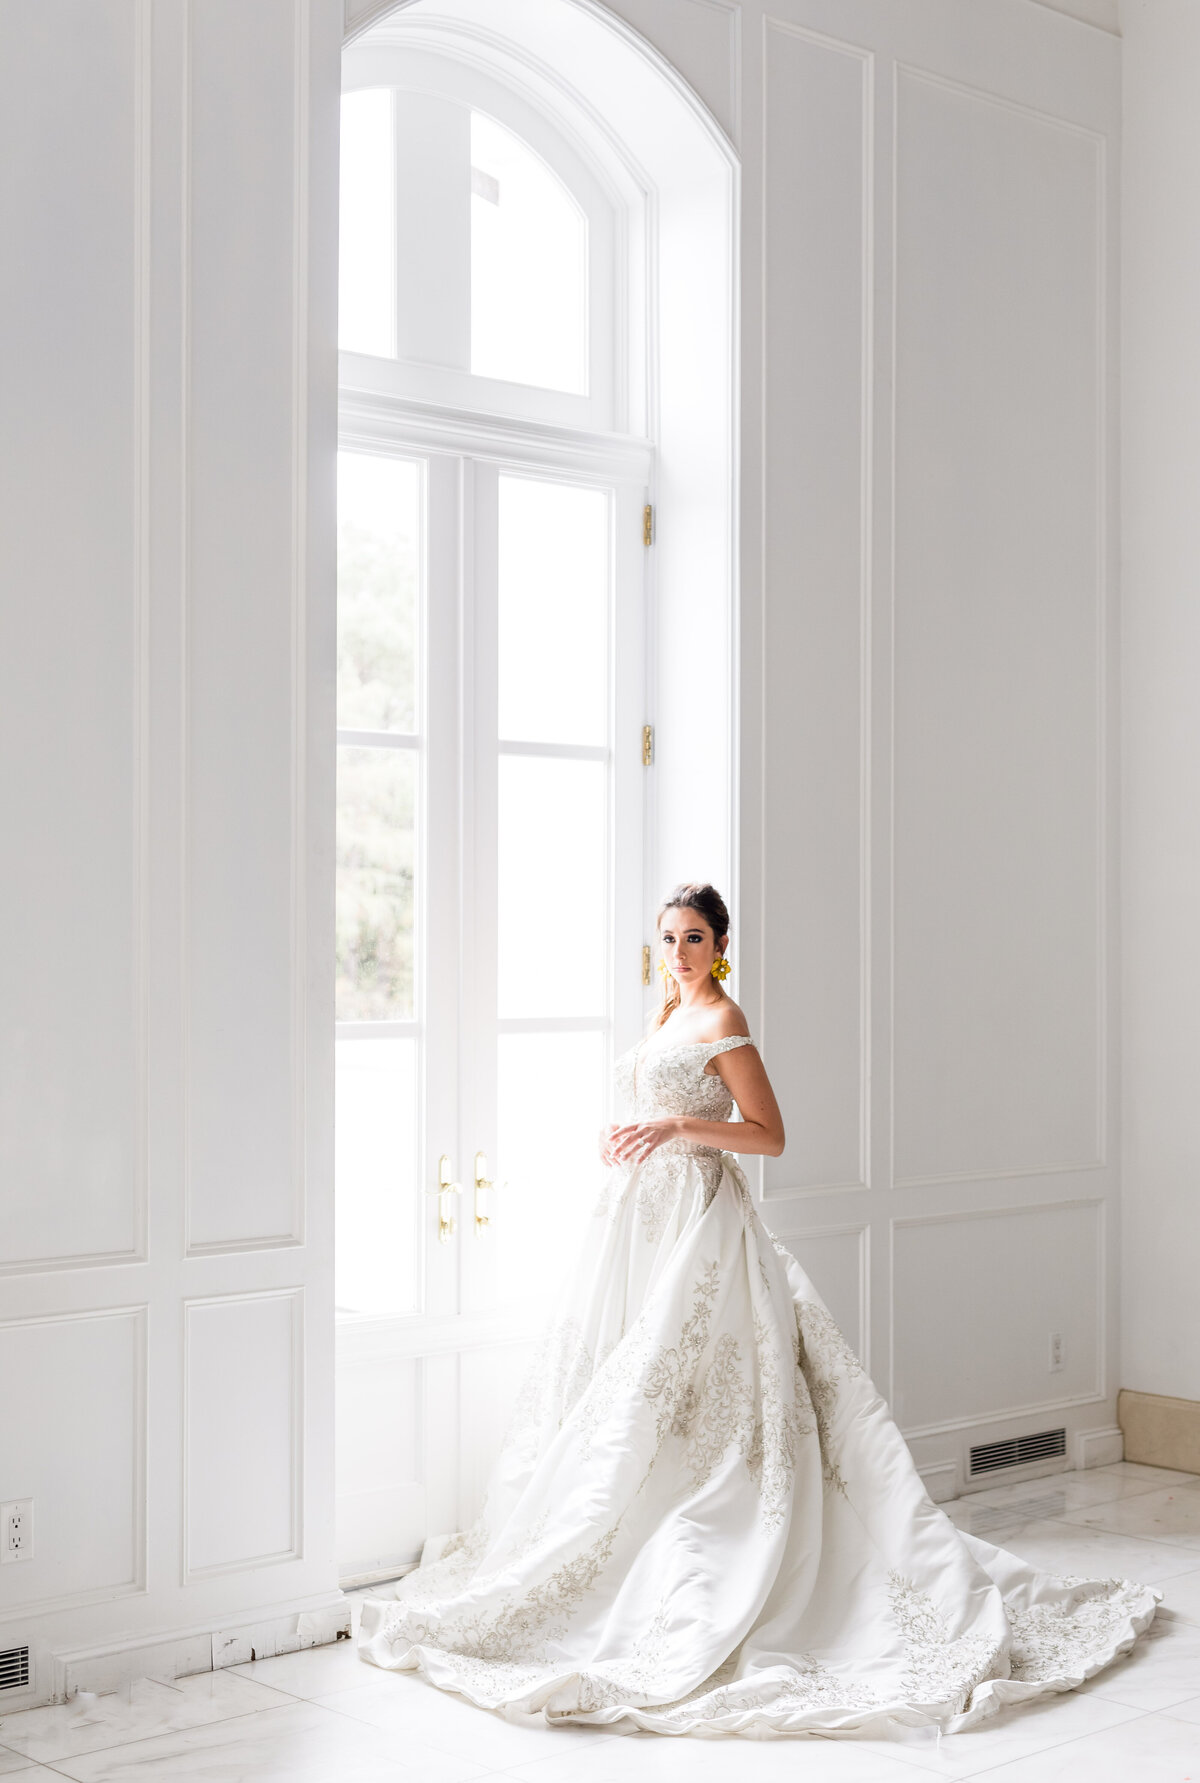 Light and Airy Luxury Bridal Photos